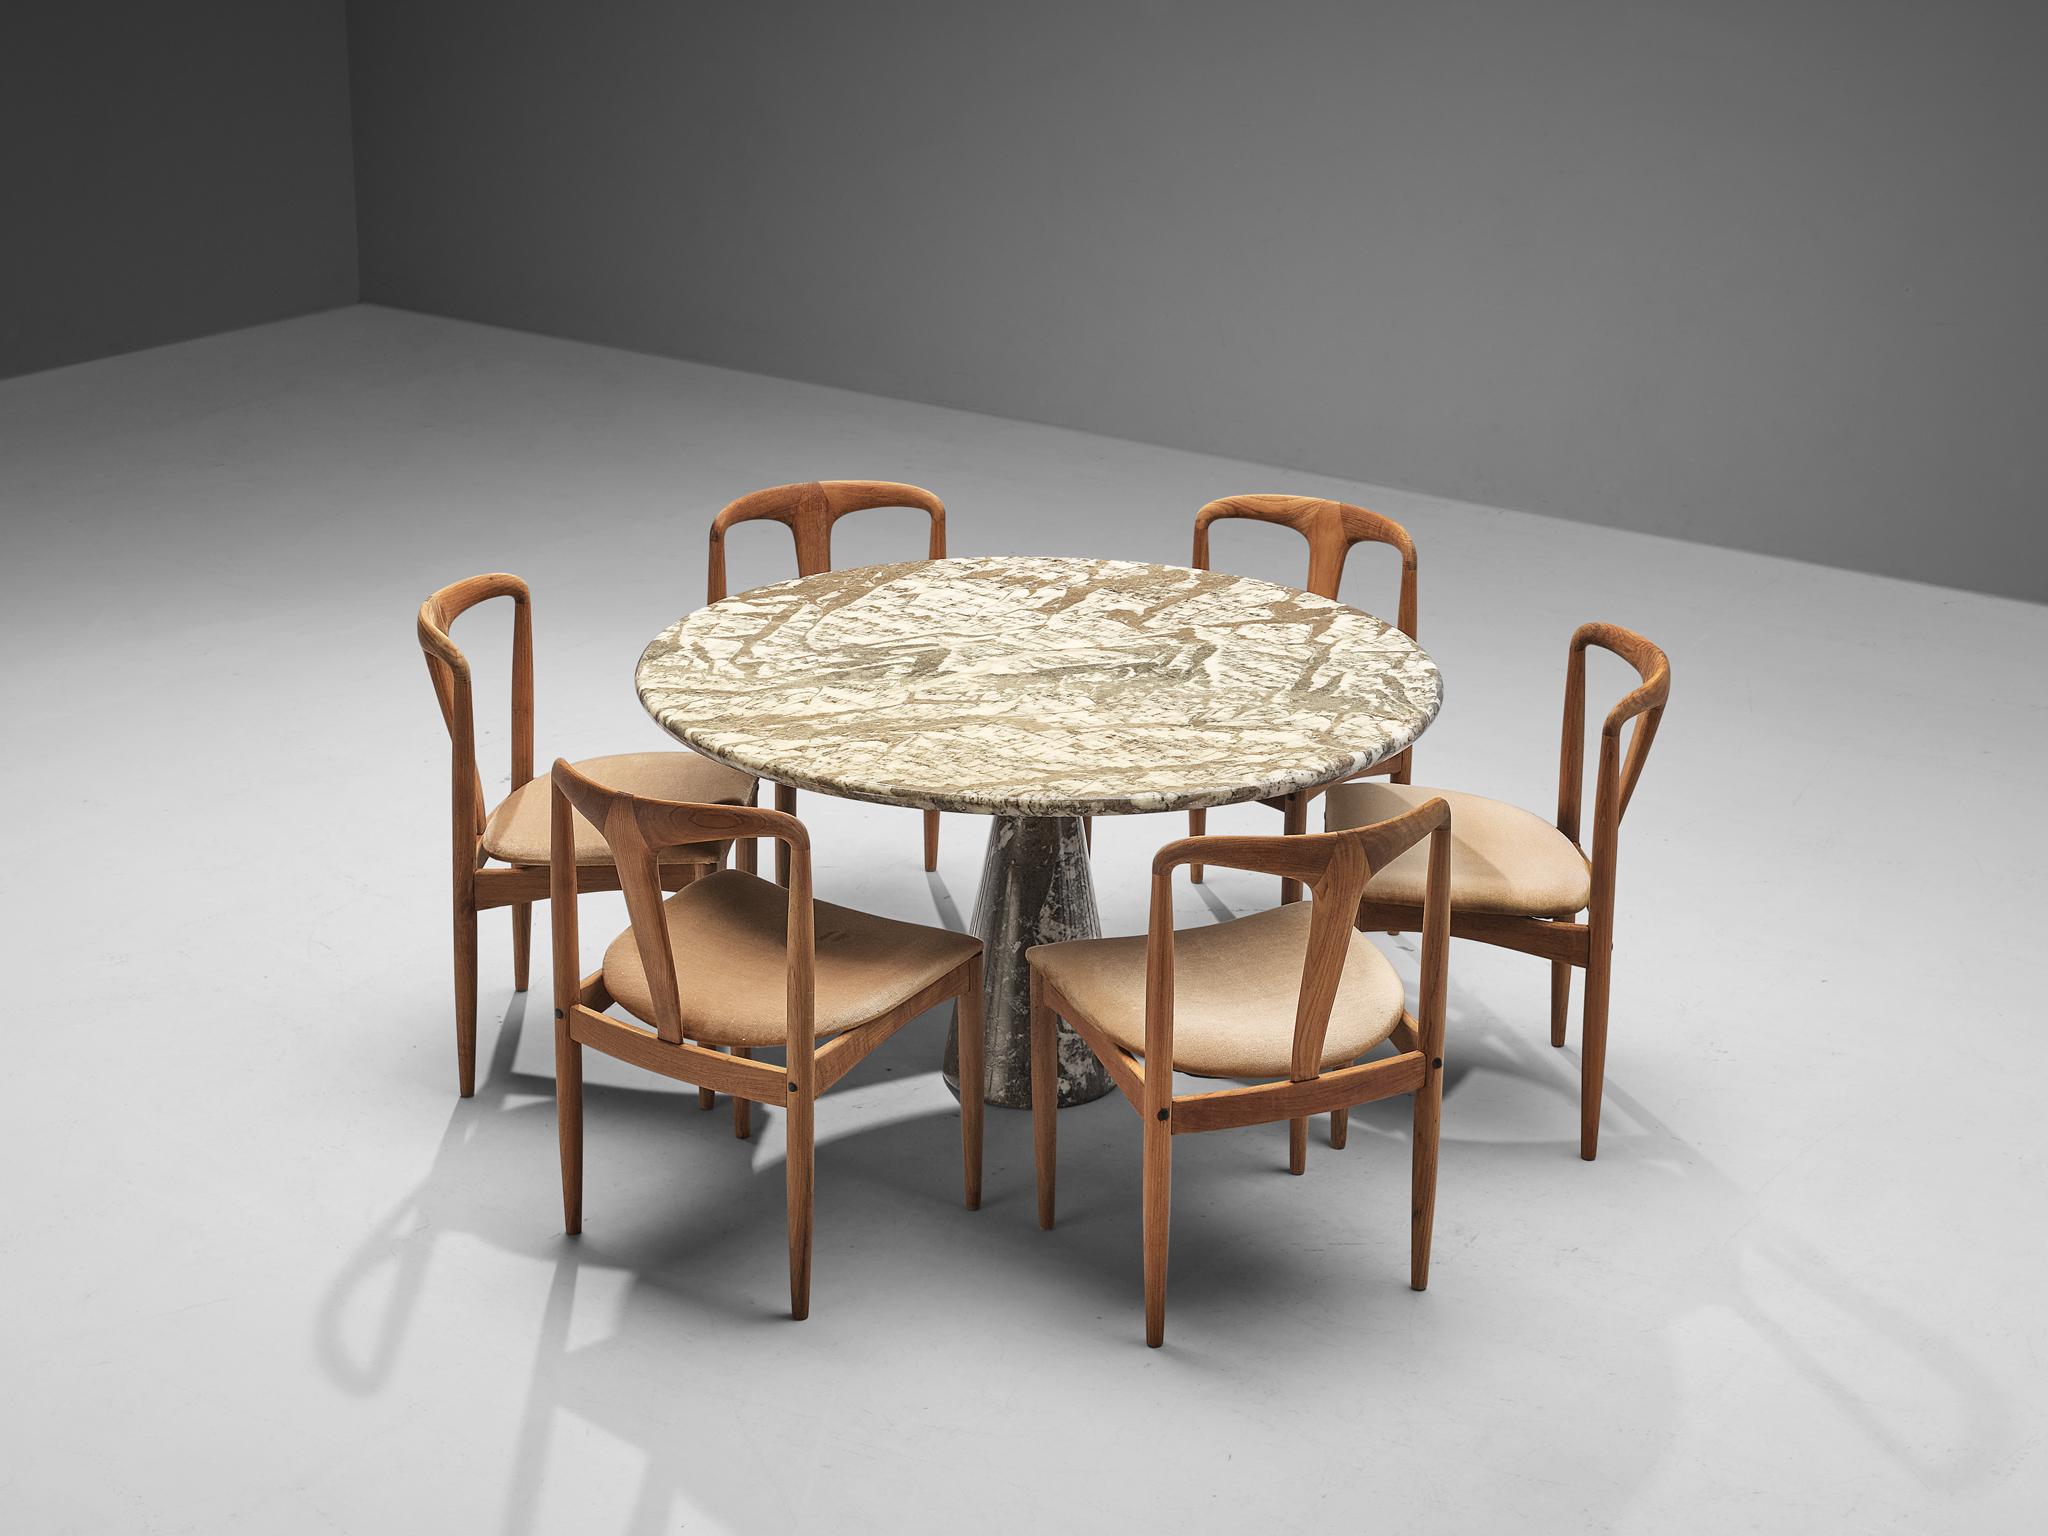 Set of Angelo Mangiarotti Dining Table in marble and Johannes Andersen six dining chairs 'Juliane' in oak. 

Angelo Mangiarotti for Skipper, table M1, marble, Italy, 1969.

This strikingly patterned brown to grey table has a cone shaped base and a